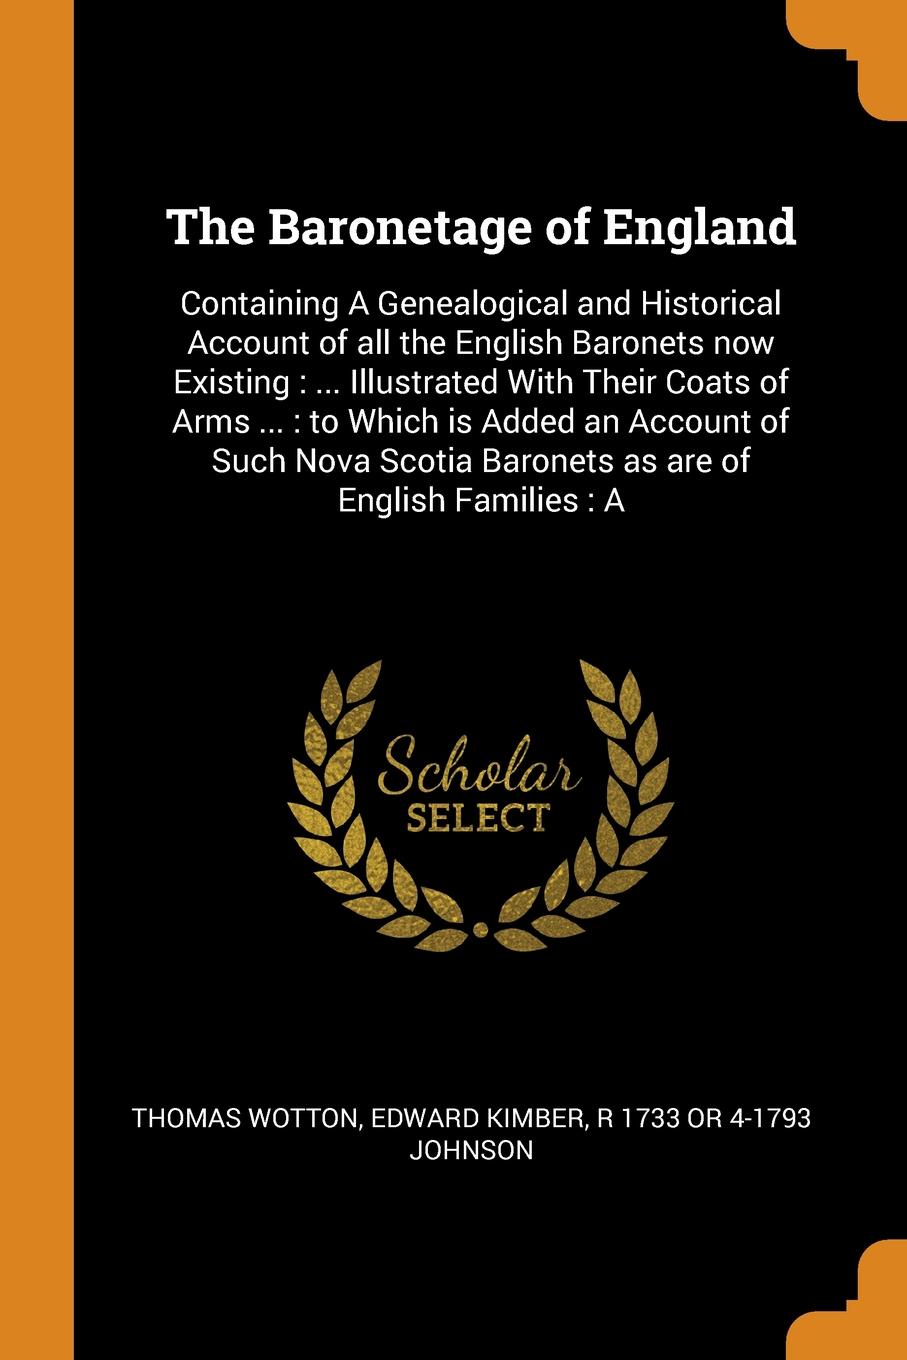 The Baronetage of England. Containing A Genealogical and Historical Account of all the English Baronets now Existing : ... Illustrated With Their Coats of Arms ... : to Which is Added an Account of Such Nova Scotia Baronets as are of English Famil...